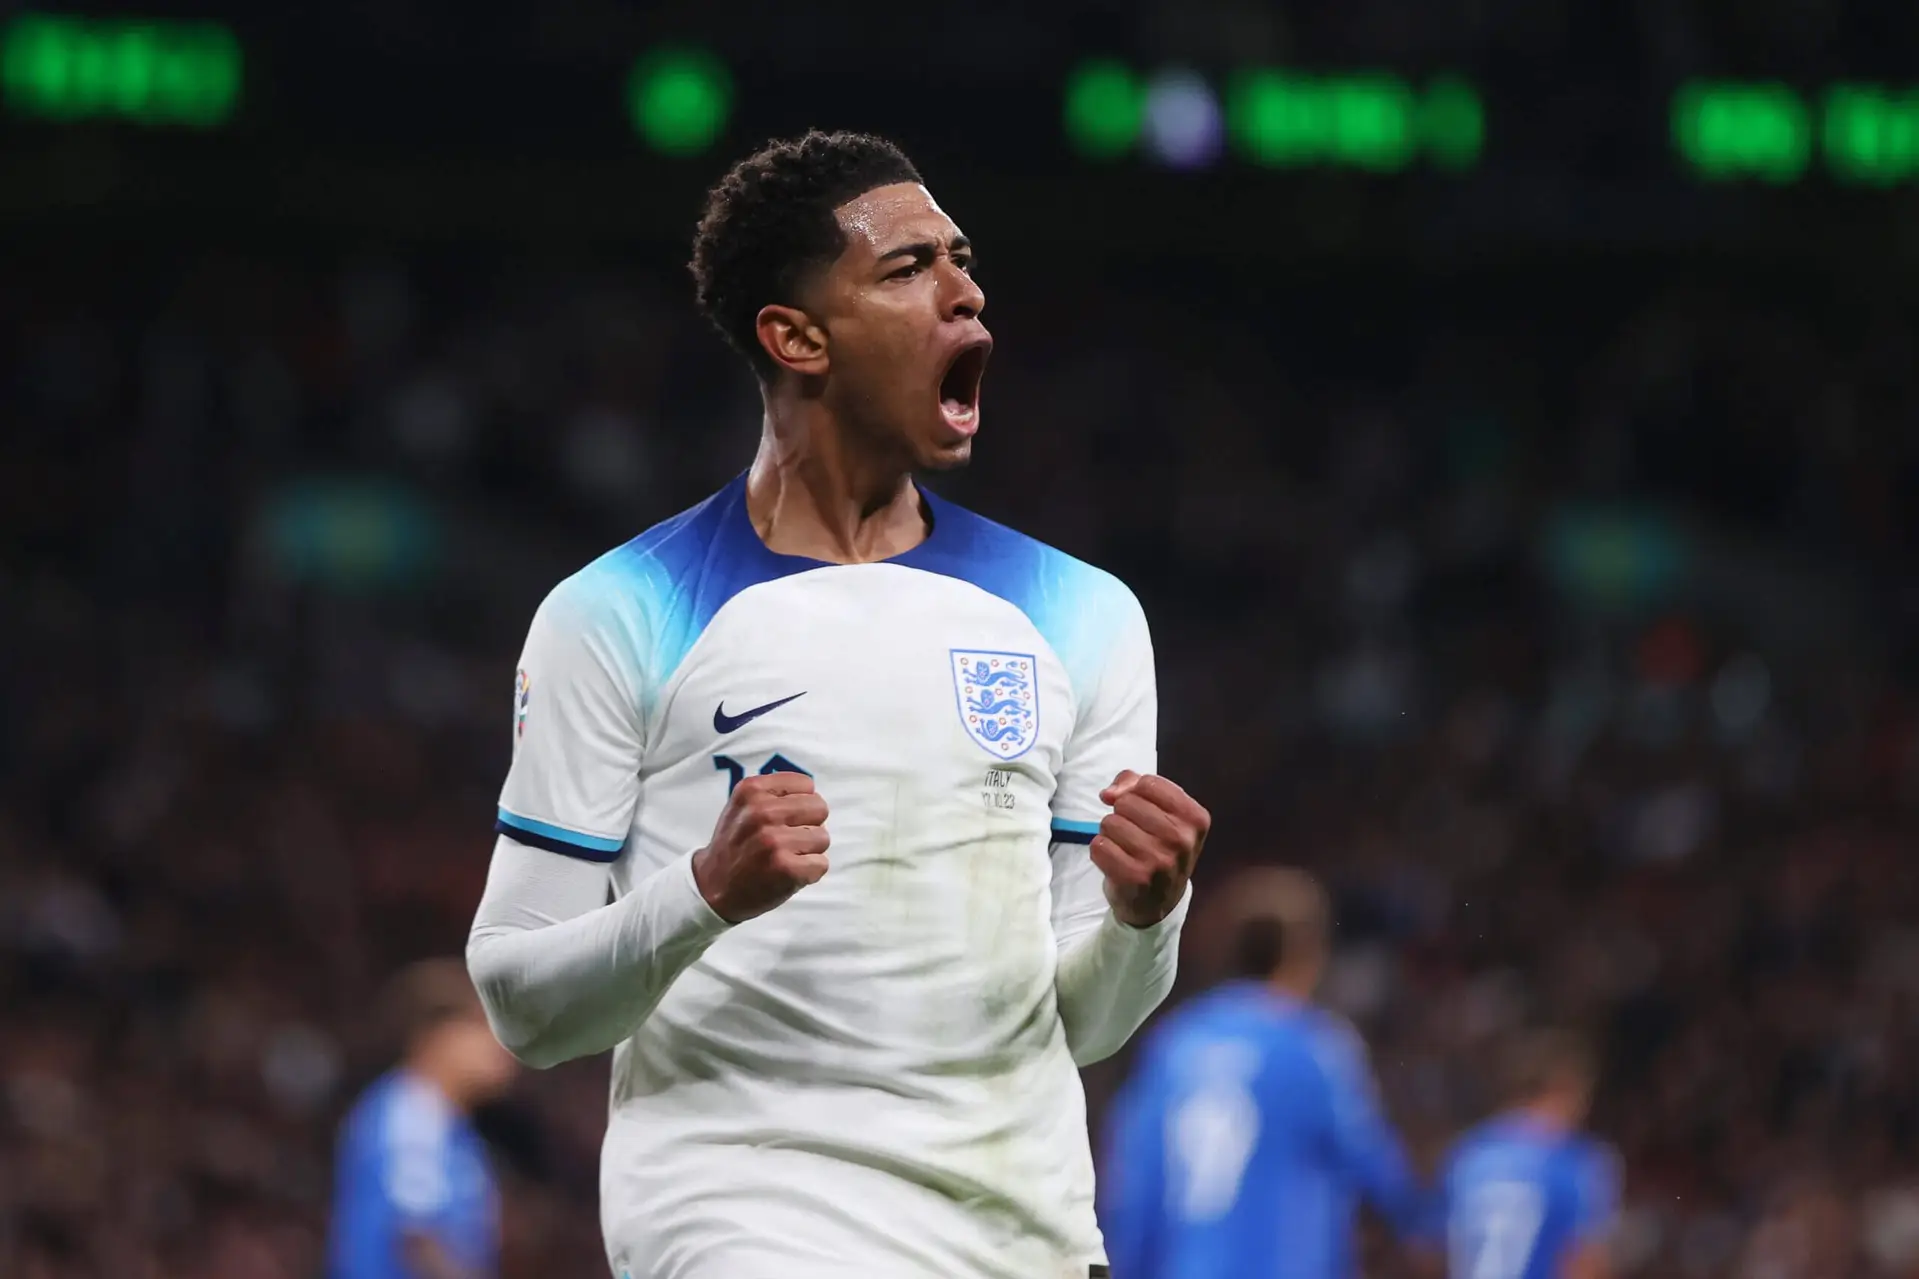 England vs Brazil prediction, odds, expert football betting tips and best  bets for international friendly